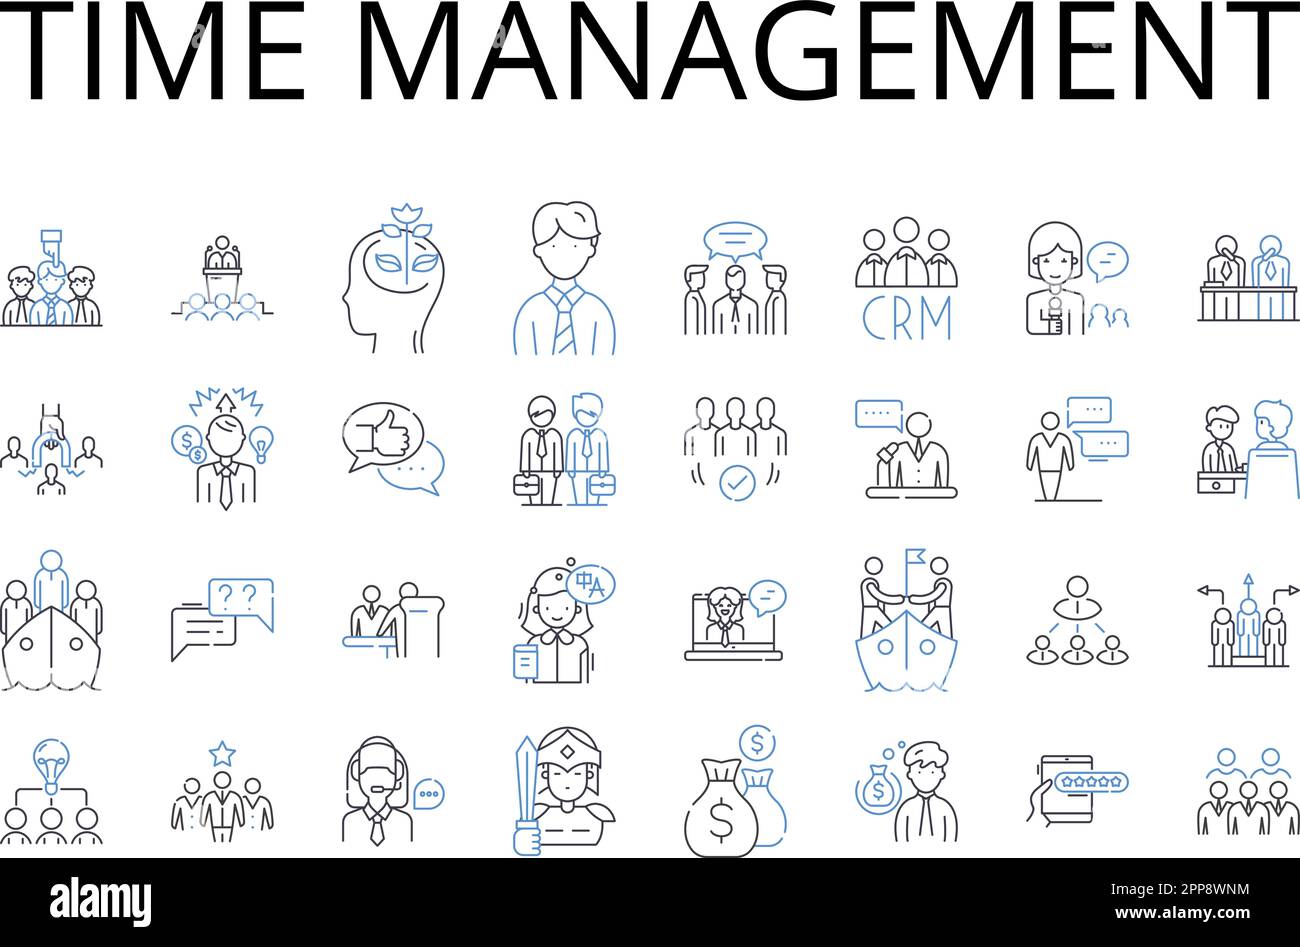 Time management line icons collection. Goal setting, Task scheduling, Project planning, Prioritization technique, workload management, deadline Stock Vector